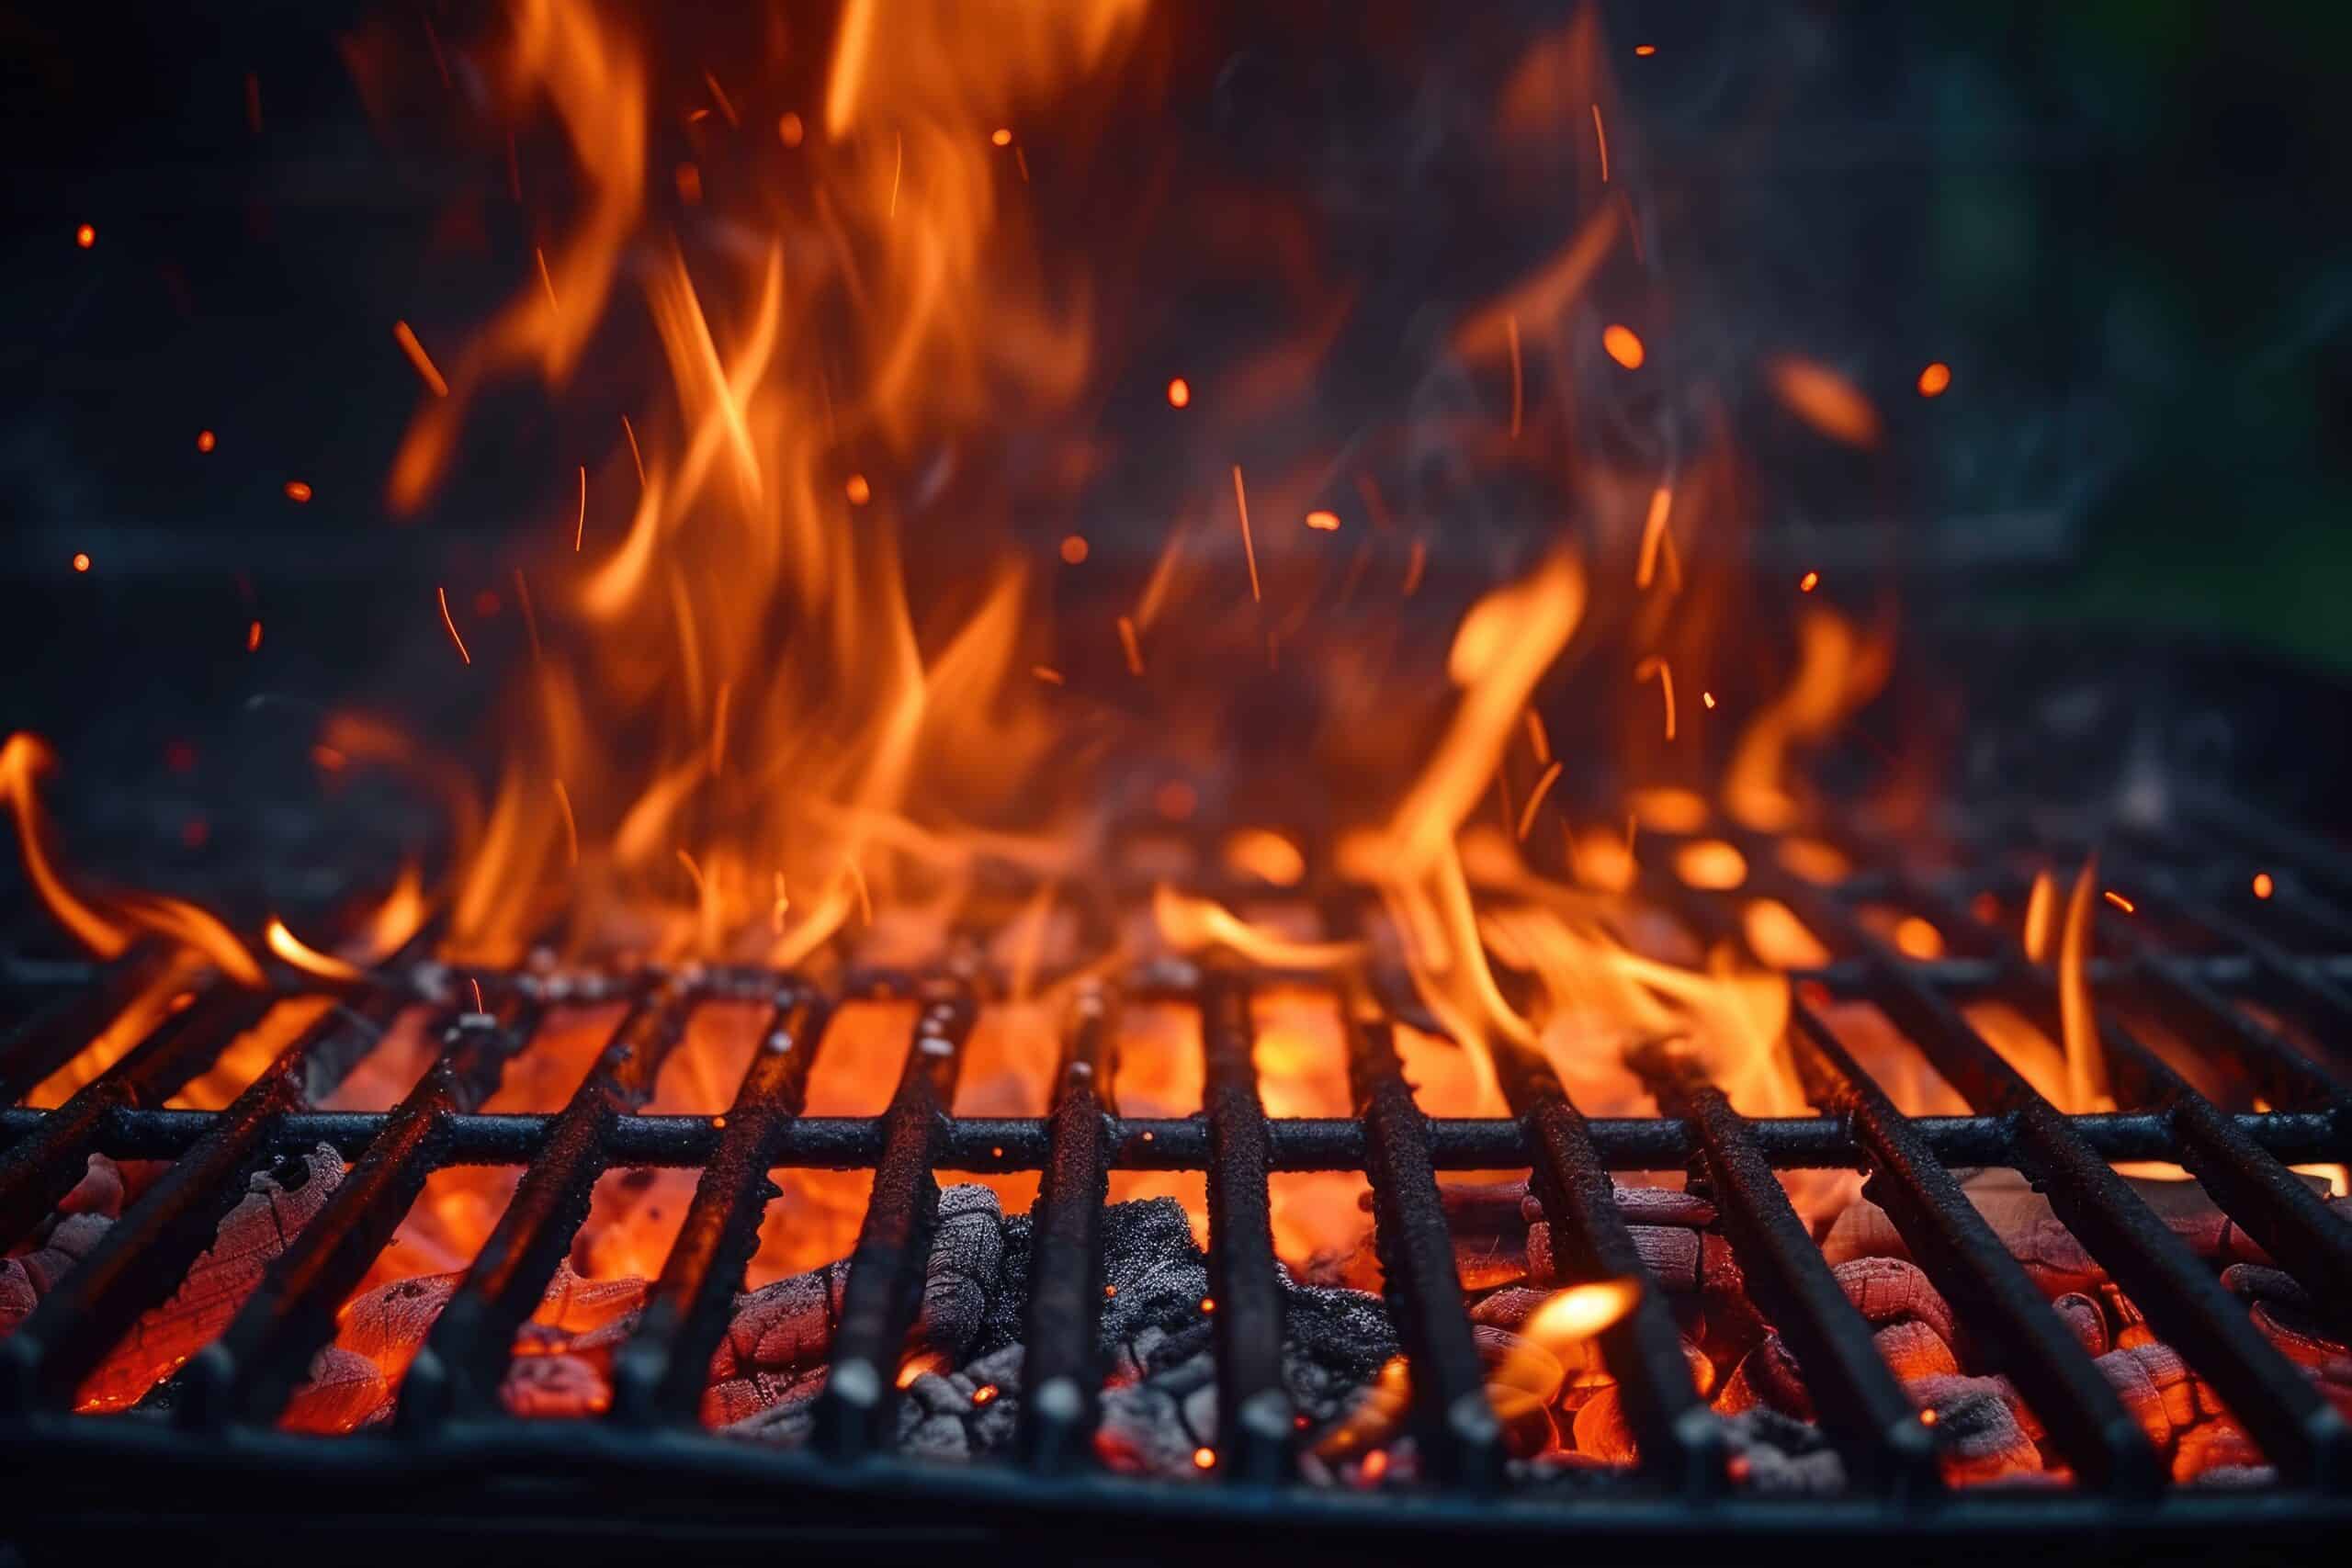 www.appr.com : How Hot Can A Charcoal Grill Get?